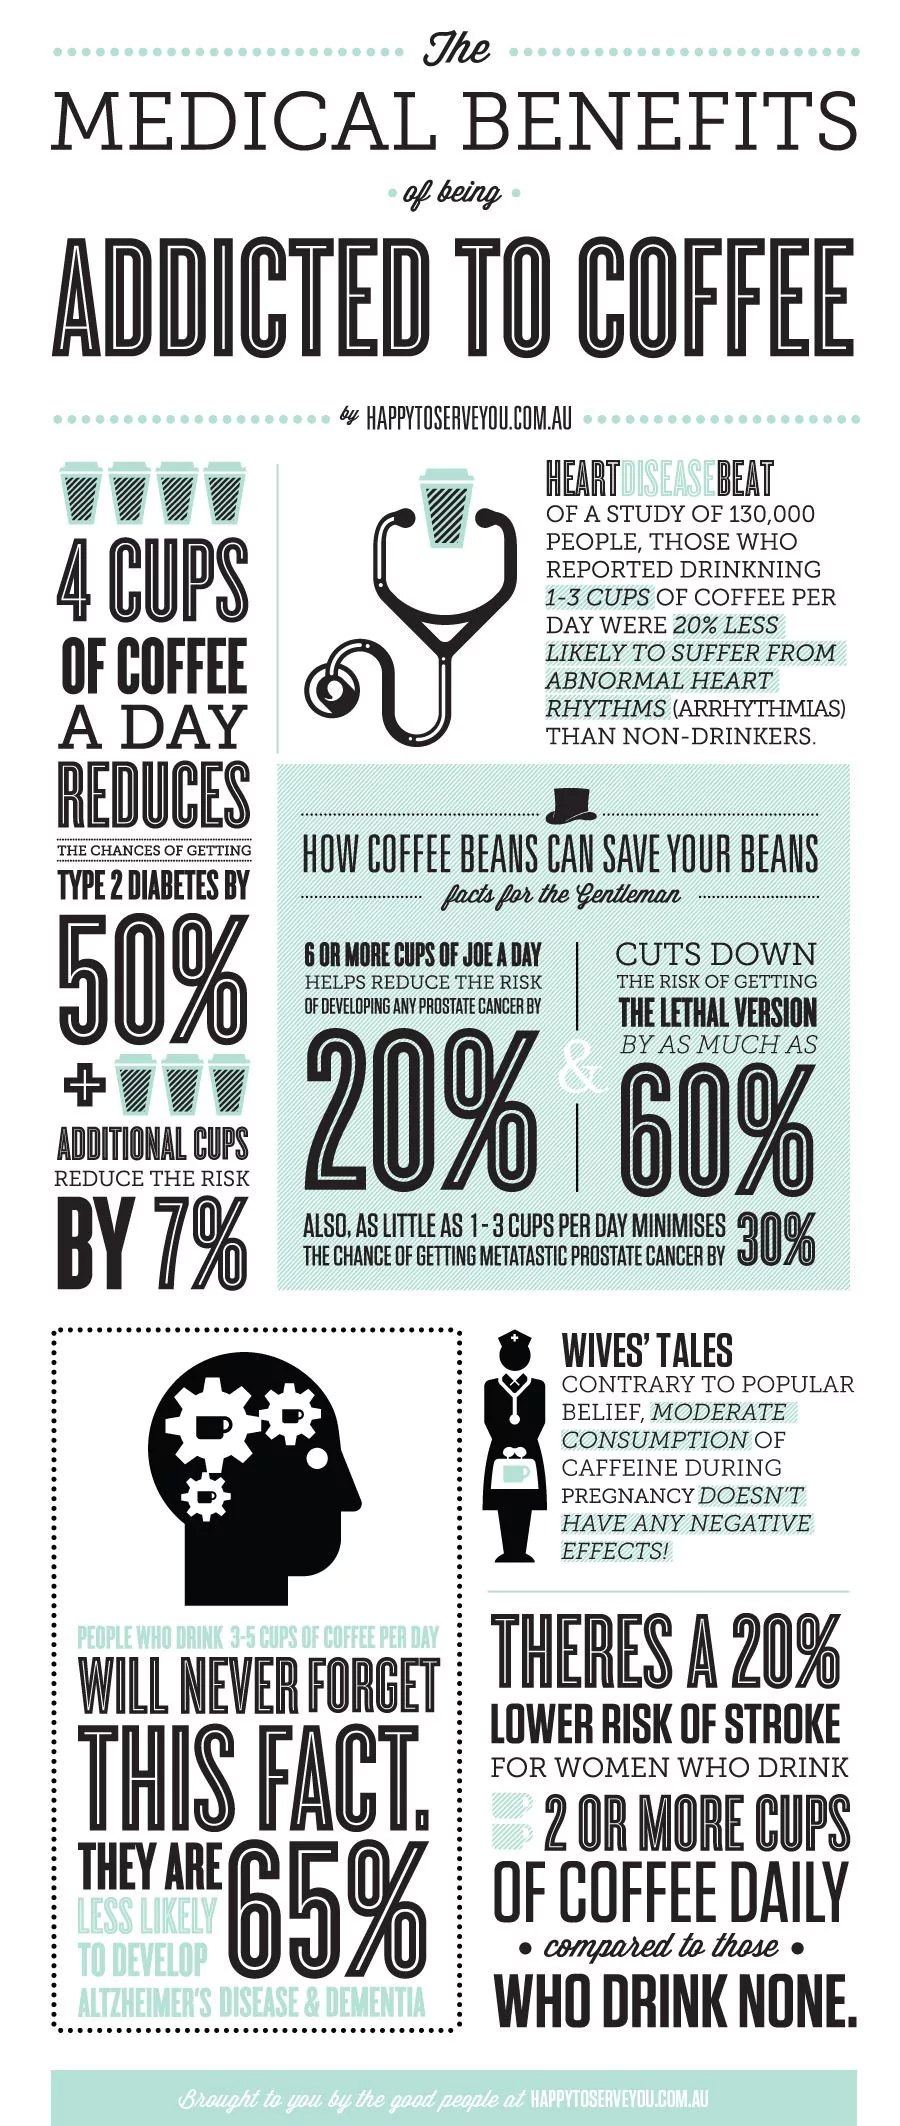 Medical Benefits Of Being Addicted To Coffee